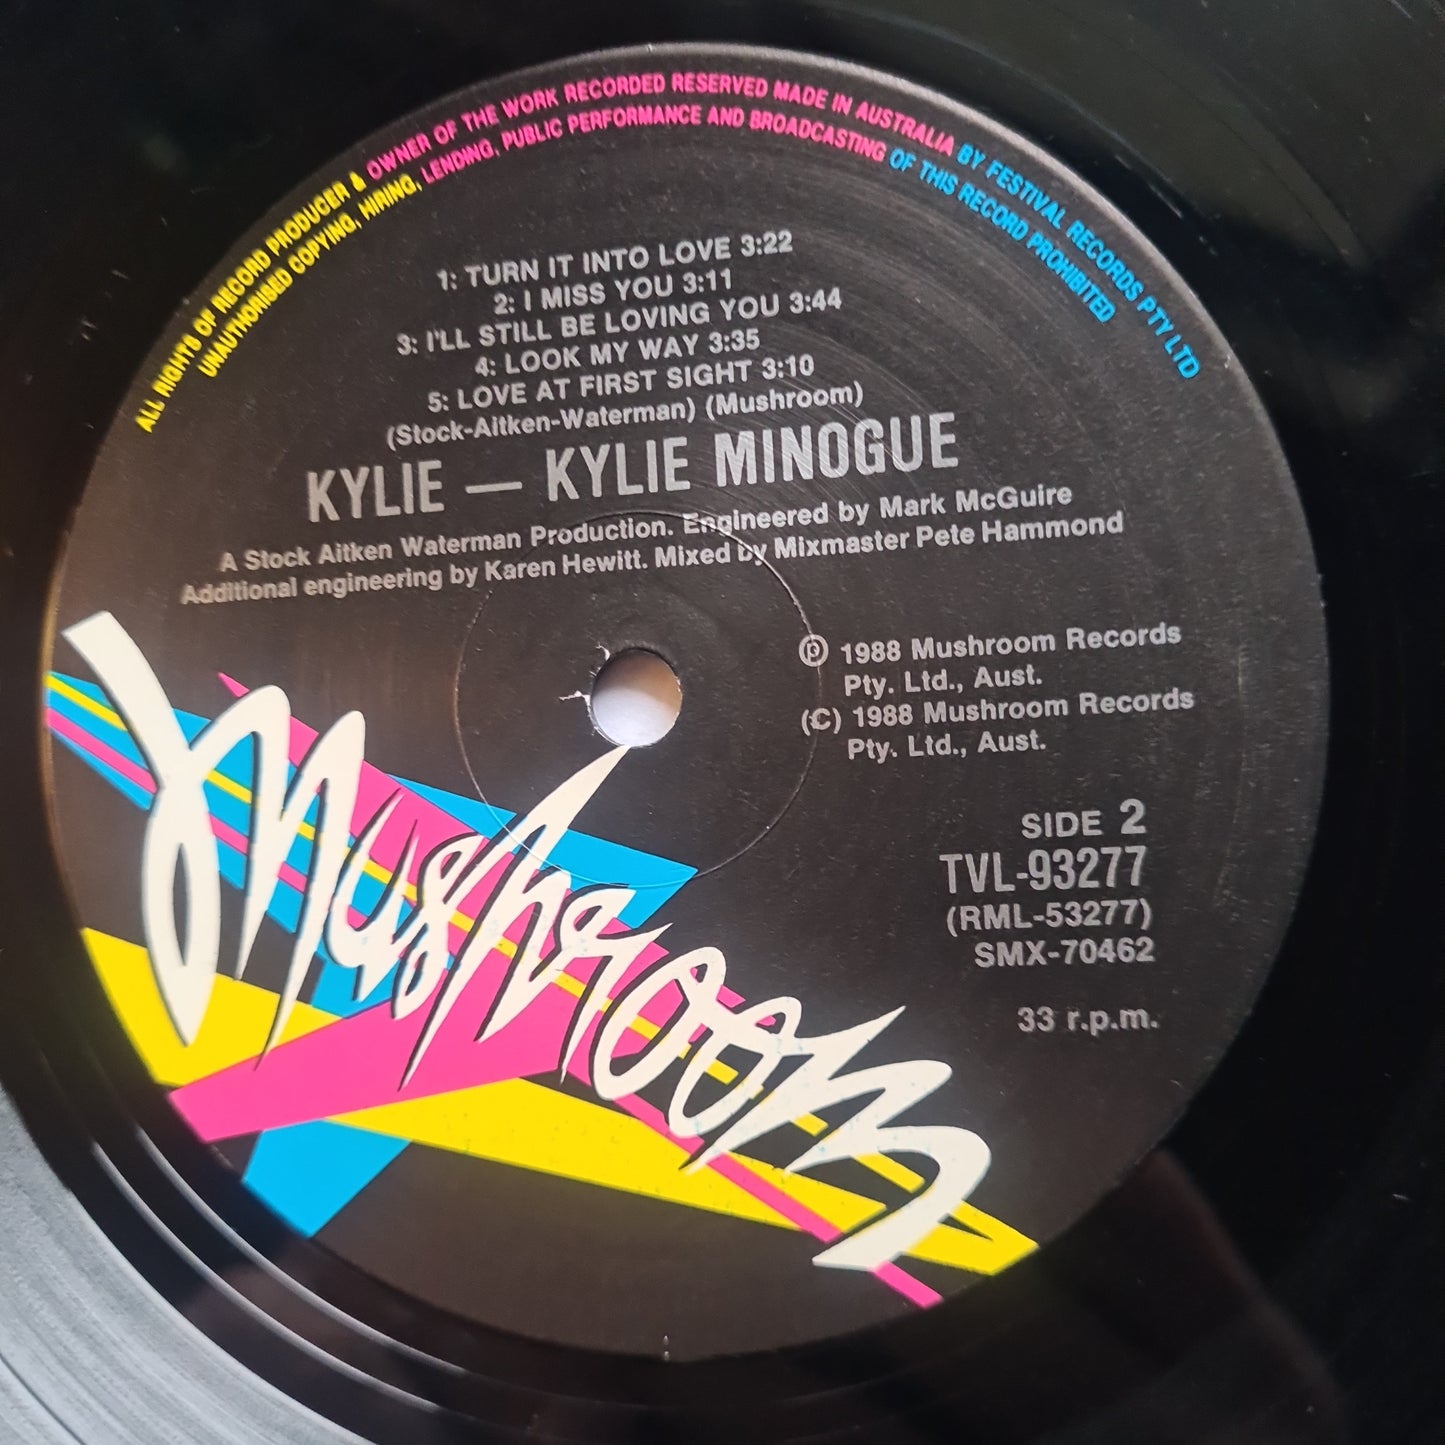 Kylie Minogue – The Kylie Collection - 1988 - 2LP - Vinyl Record